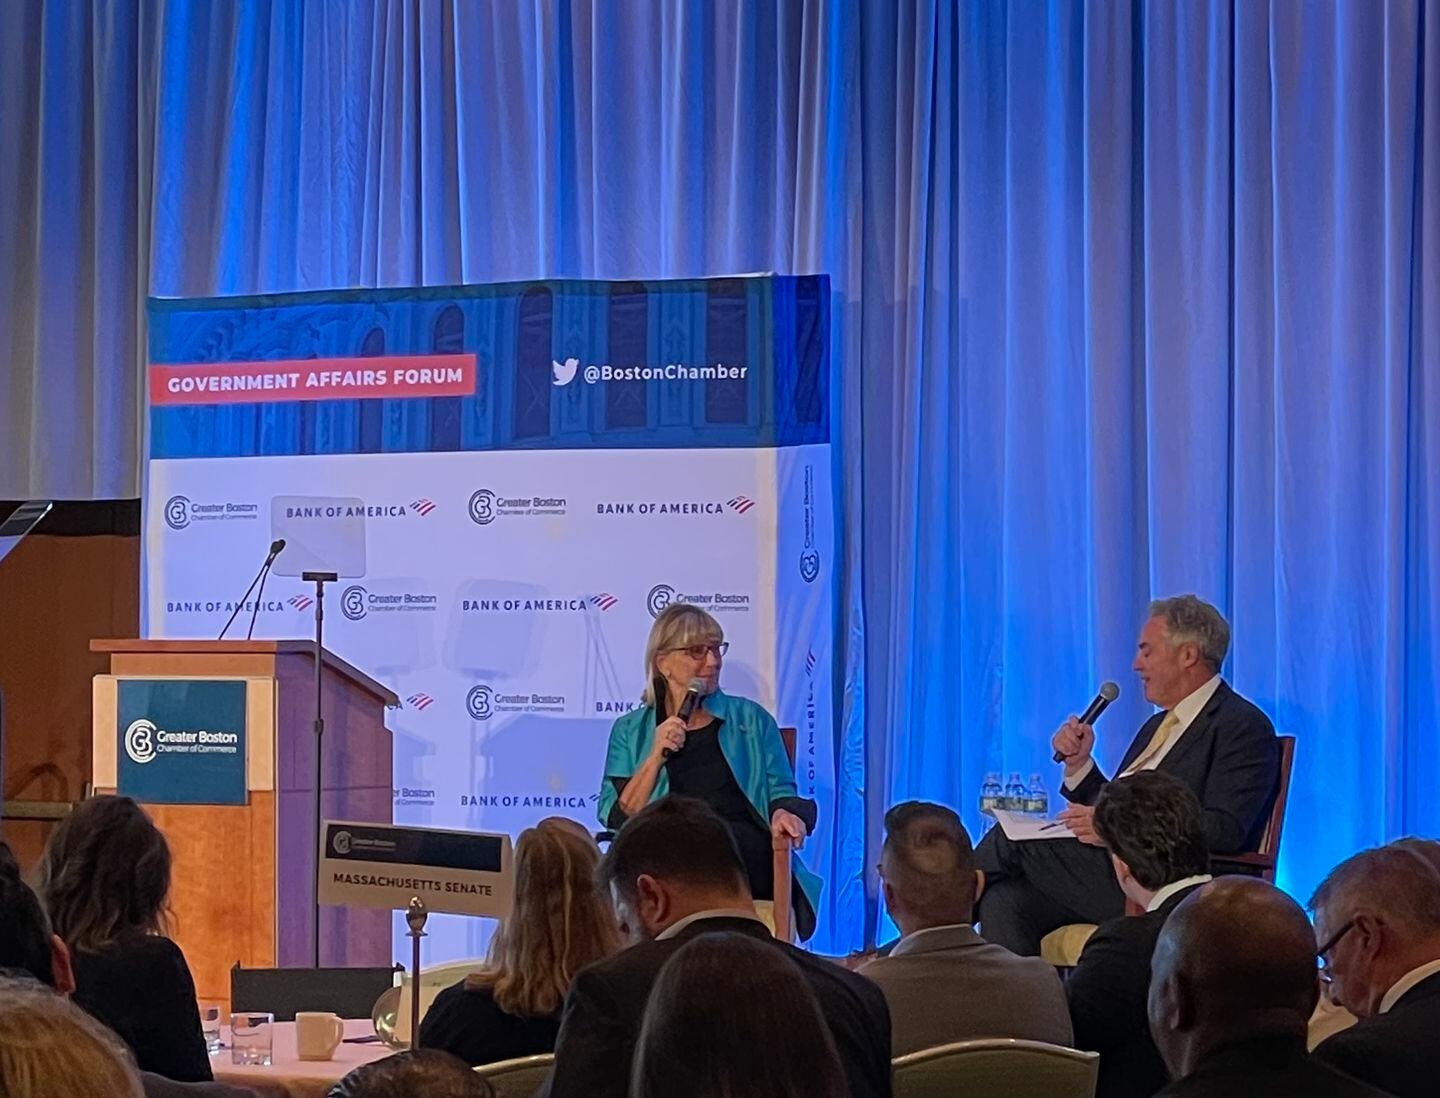 Senate President Karen Spilka, left, speaking with Greater Boston Chamber of Commerce chief Jim Rooney. During the Q&A, Spilka expressed her opposition to a state ballot question that would end the use of MCAS tests as a high school graduation requirement in Massachusetts.